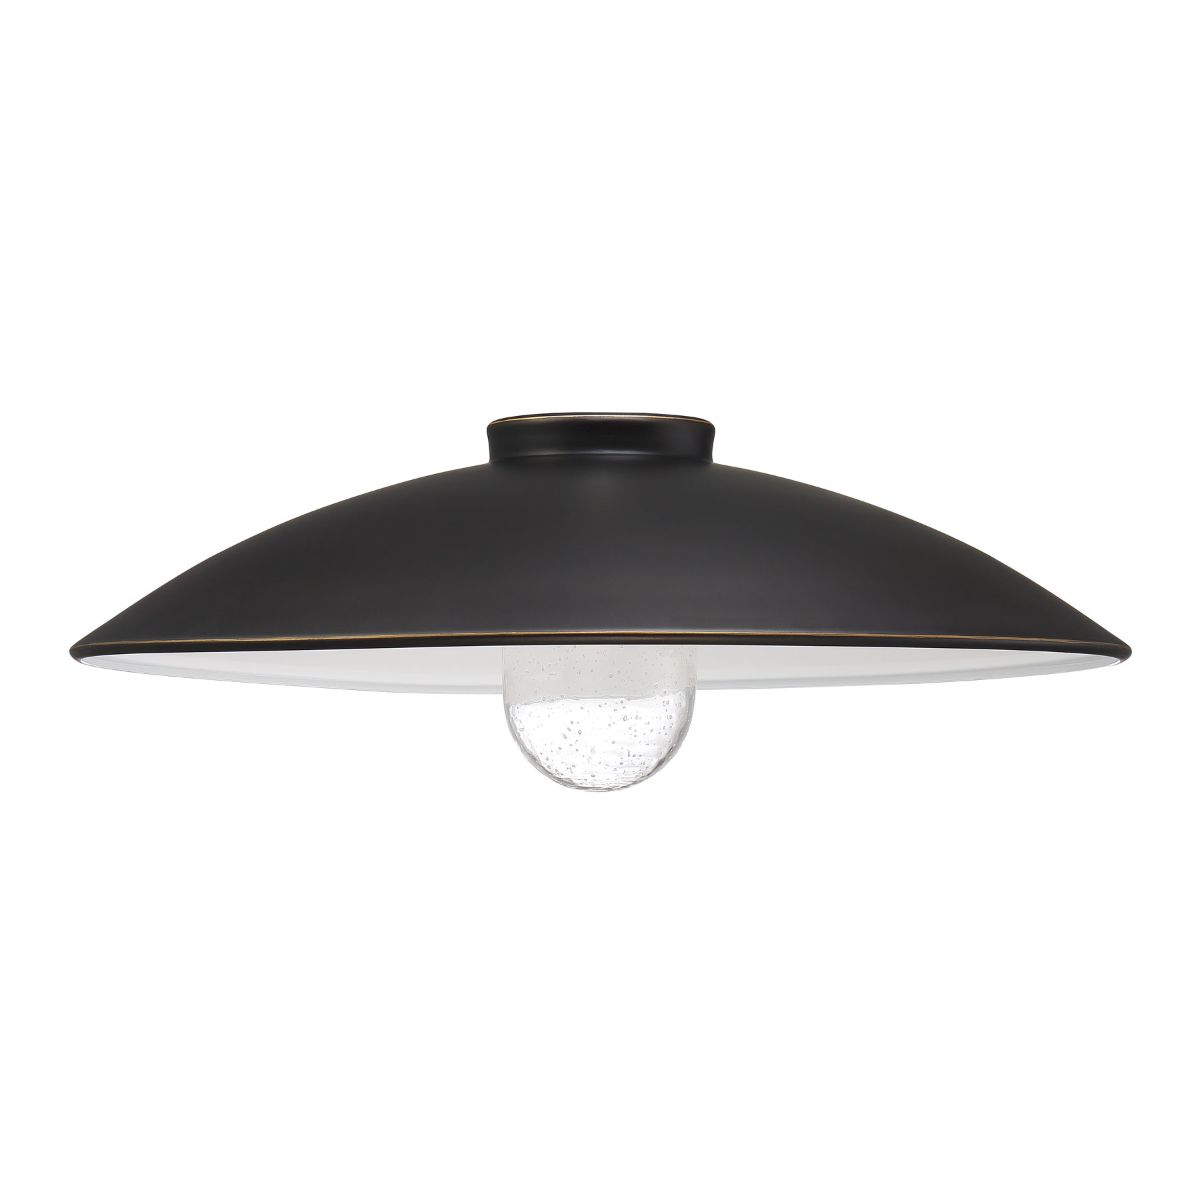 RLM 18 in. Path Light Shade Oil Rubbed Bronze finish